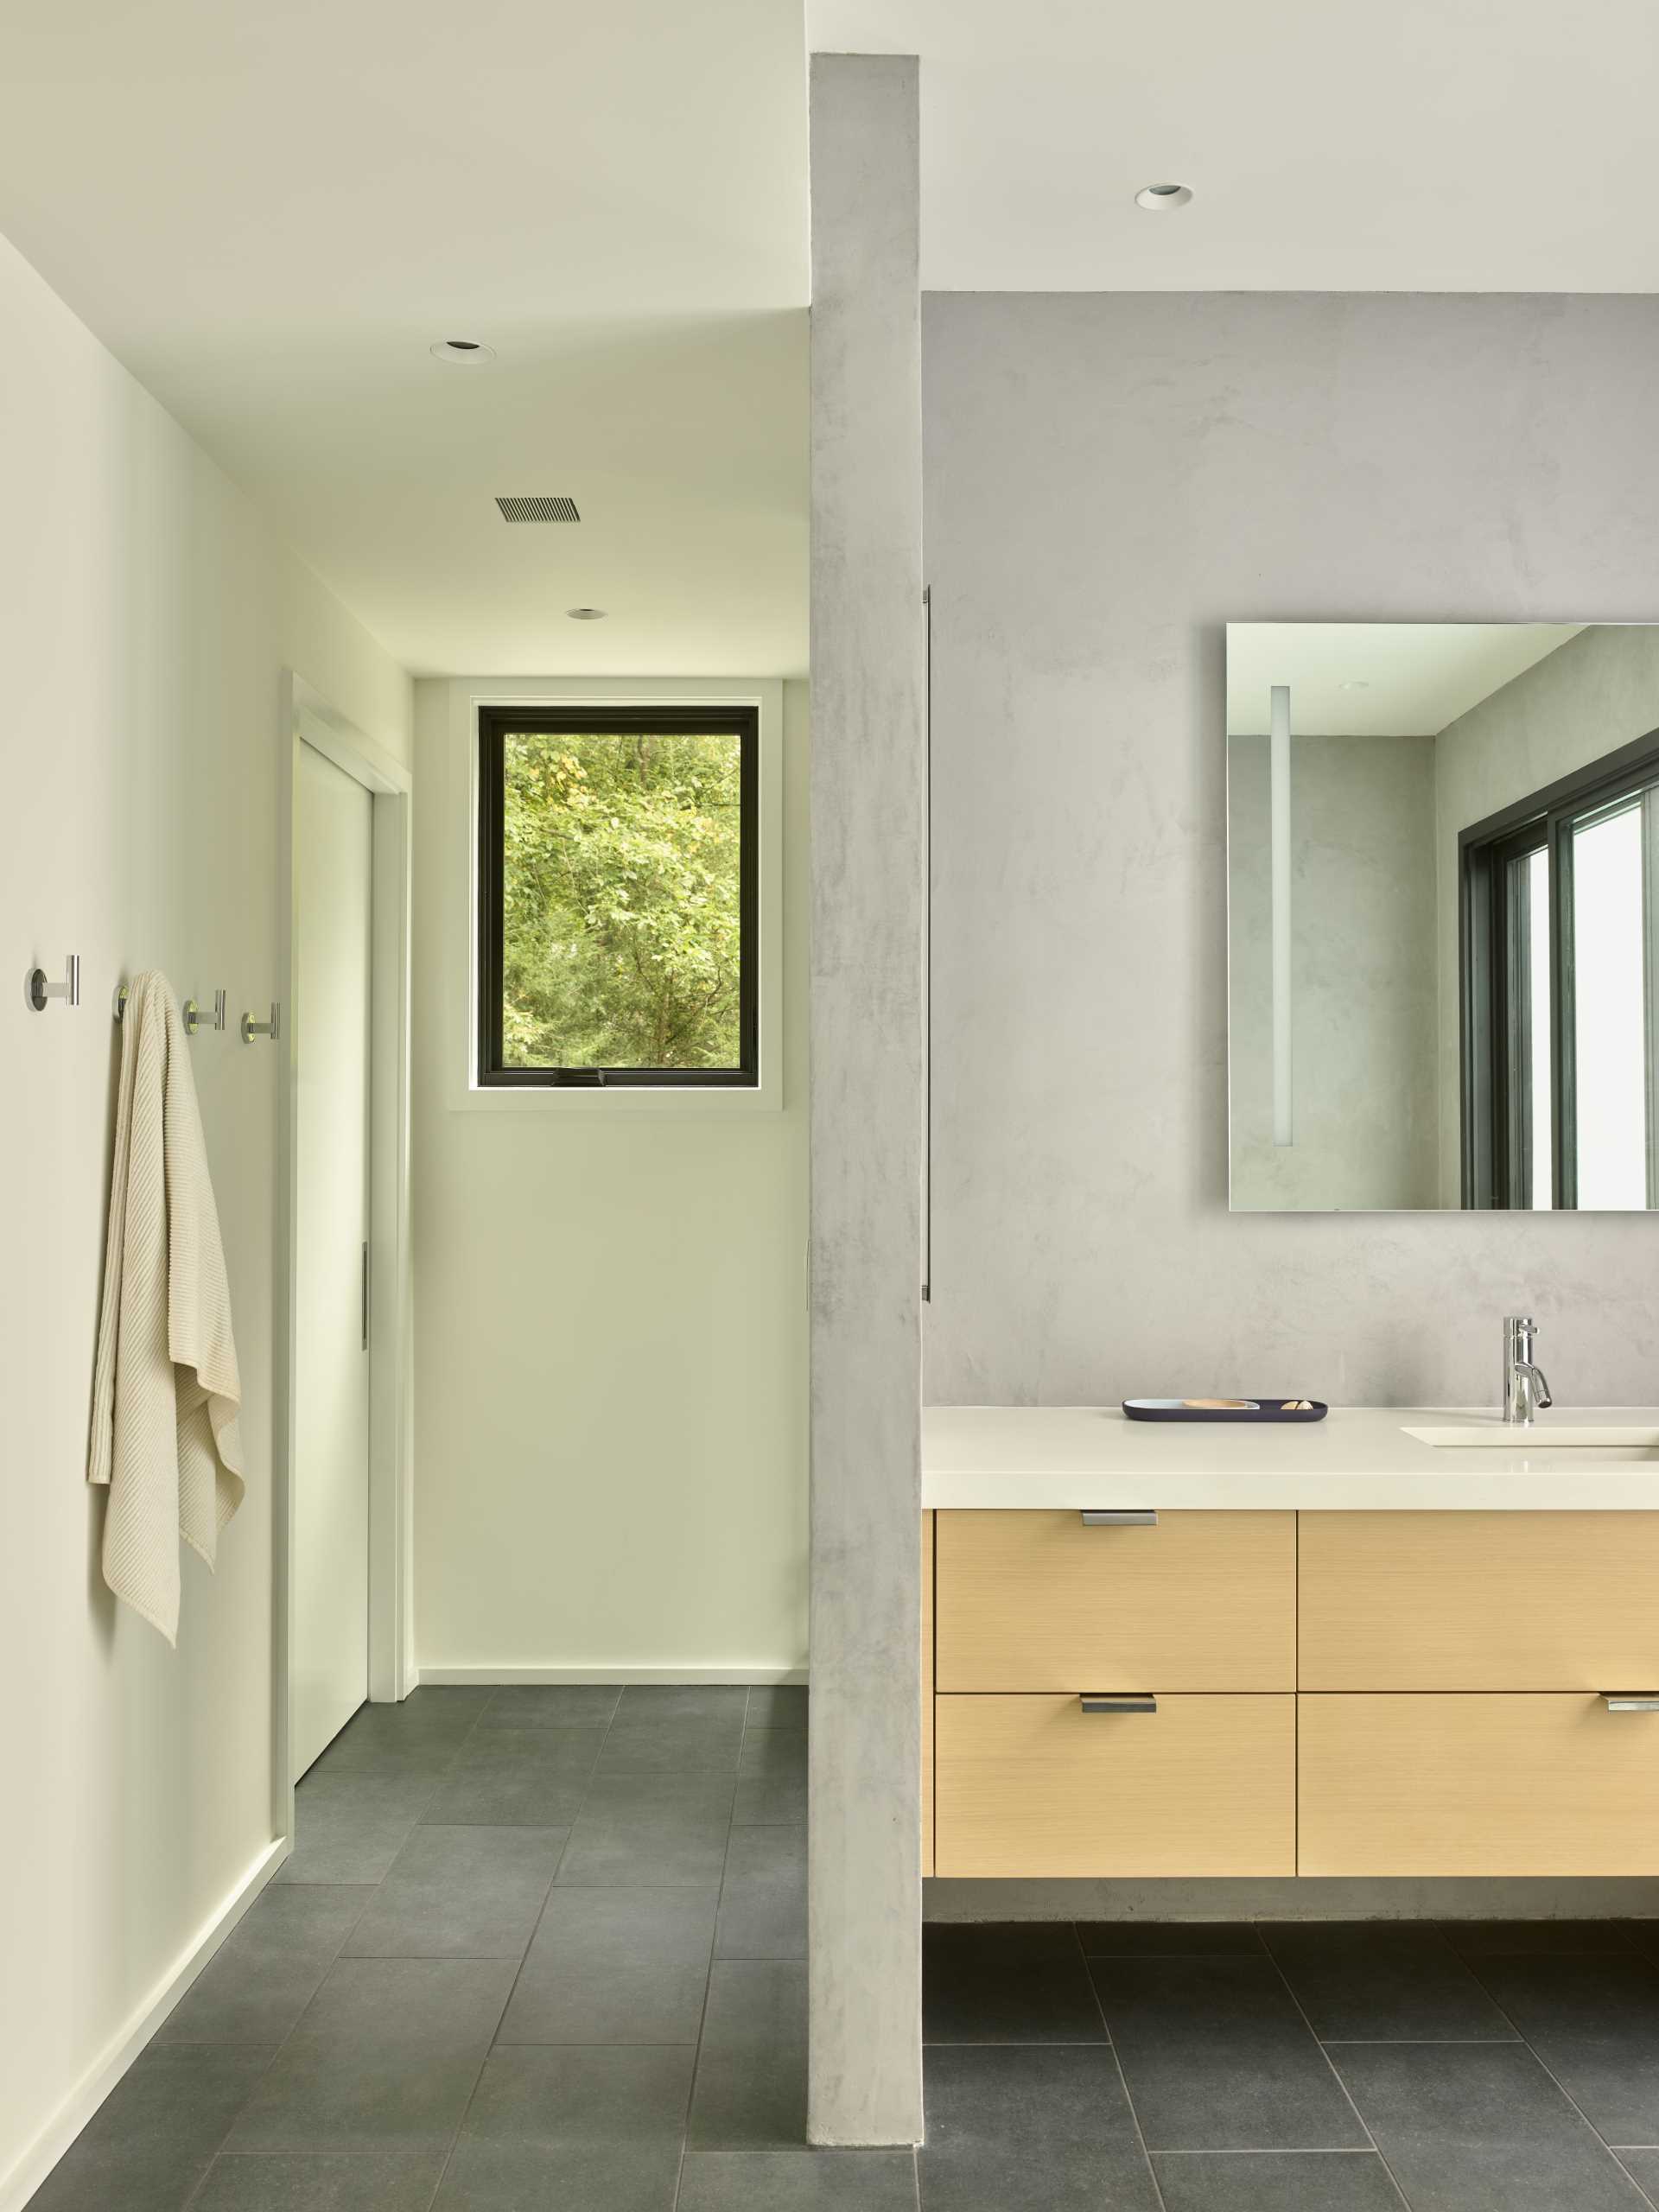 A modern bathroom with a window that frames the forest view.